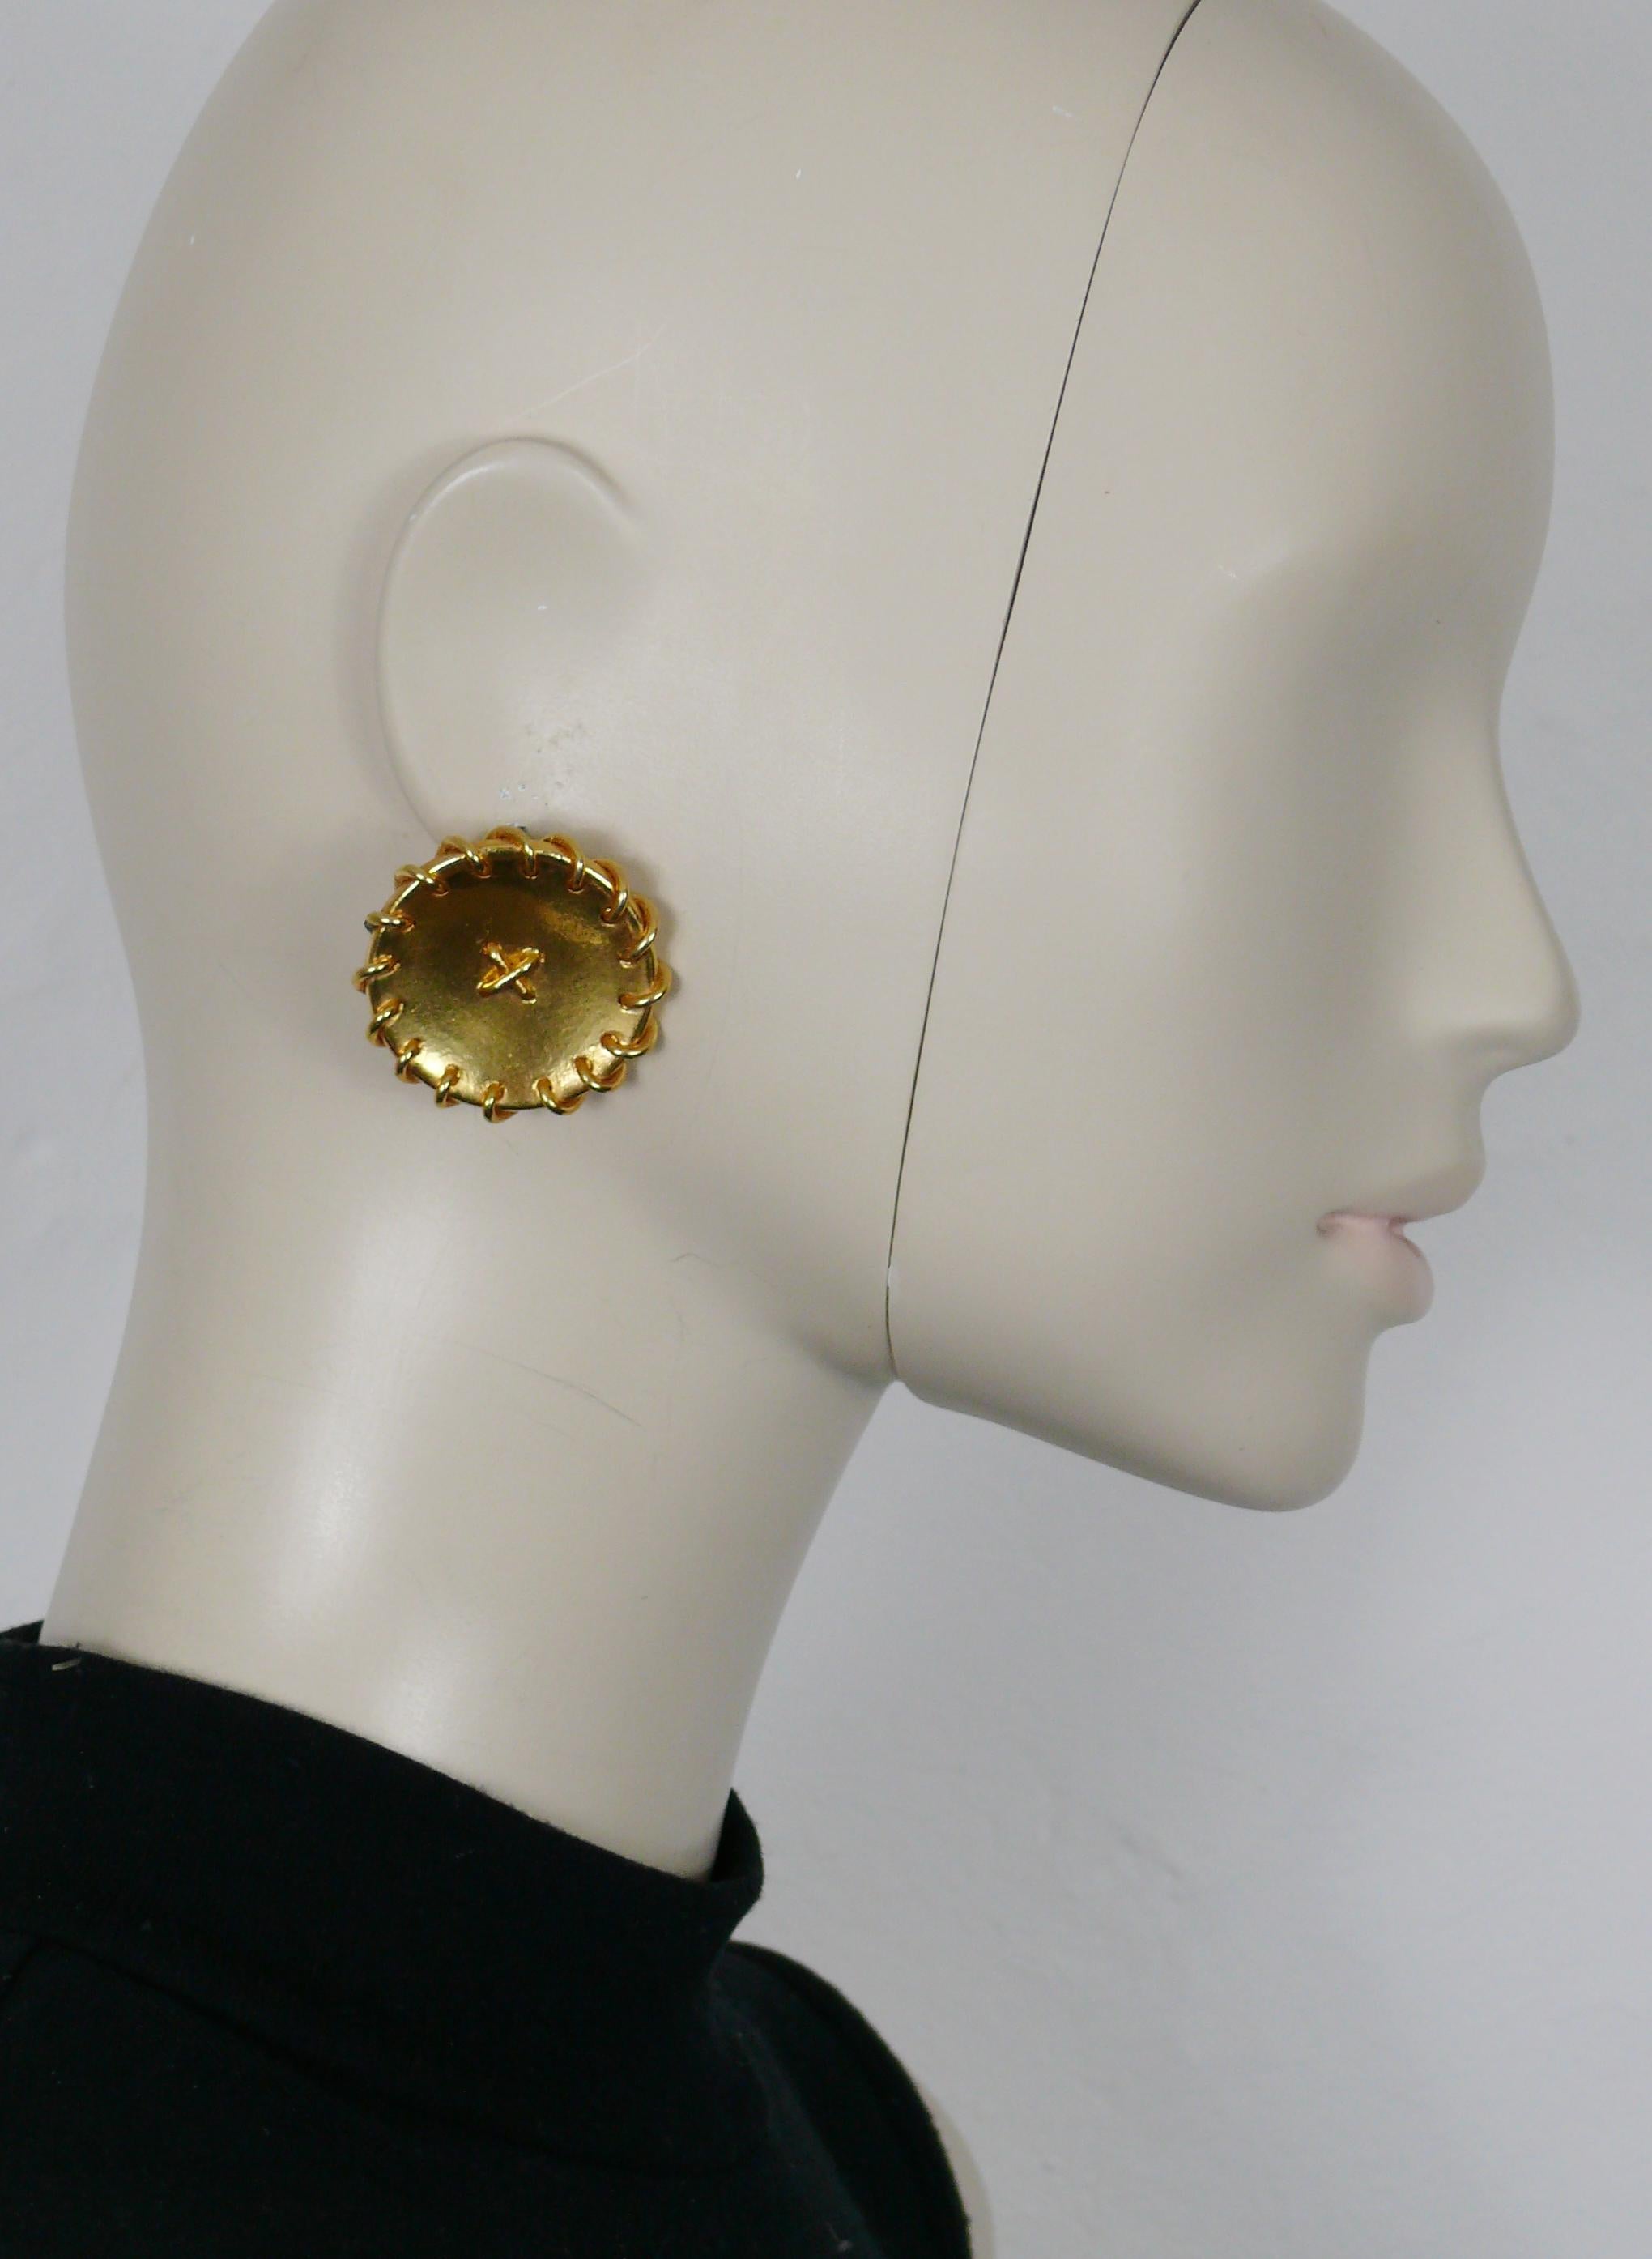 HERMES vintage massive gold tone clip-on earrings featuring a button design.

Embossed HERMES PARIS.

Indicative measurements : diameter approx. 3.6 cm (1.42 inches).

Weight per earring : approx. 29 grams.

Material : Gold tone metal